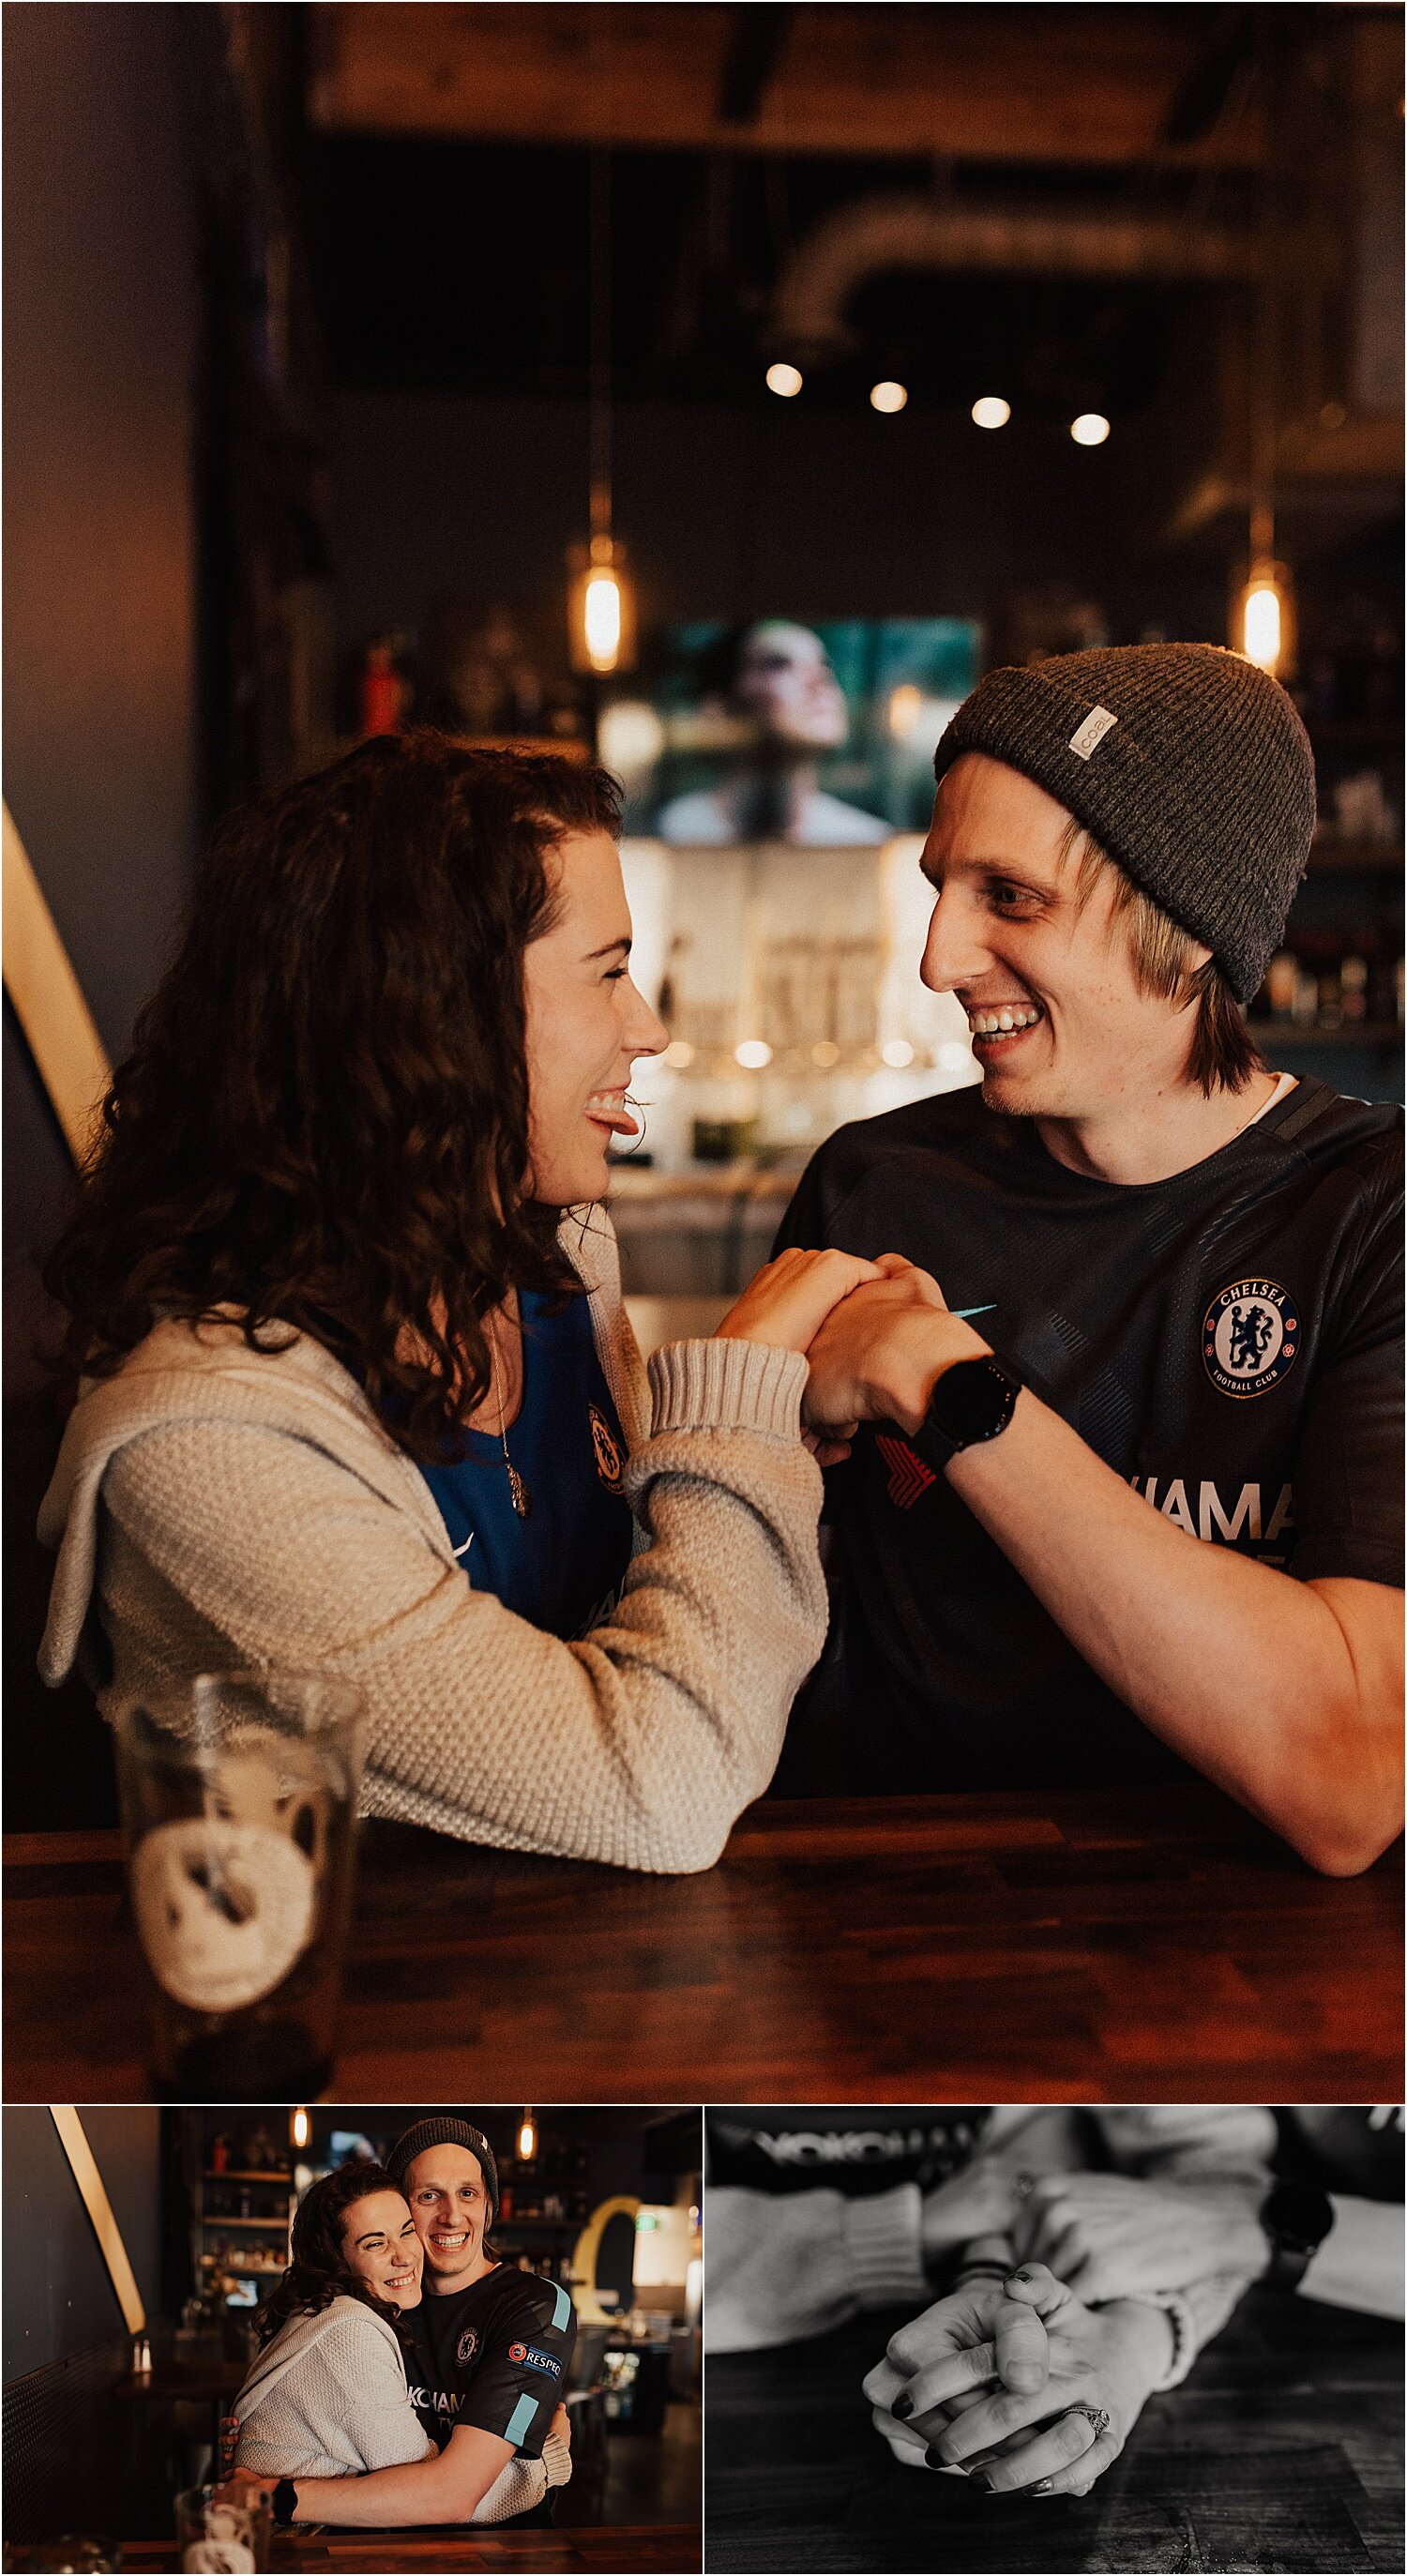 brewery foothills winter engagement session boise idaho1.jpg